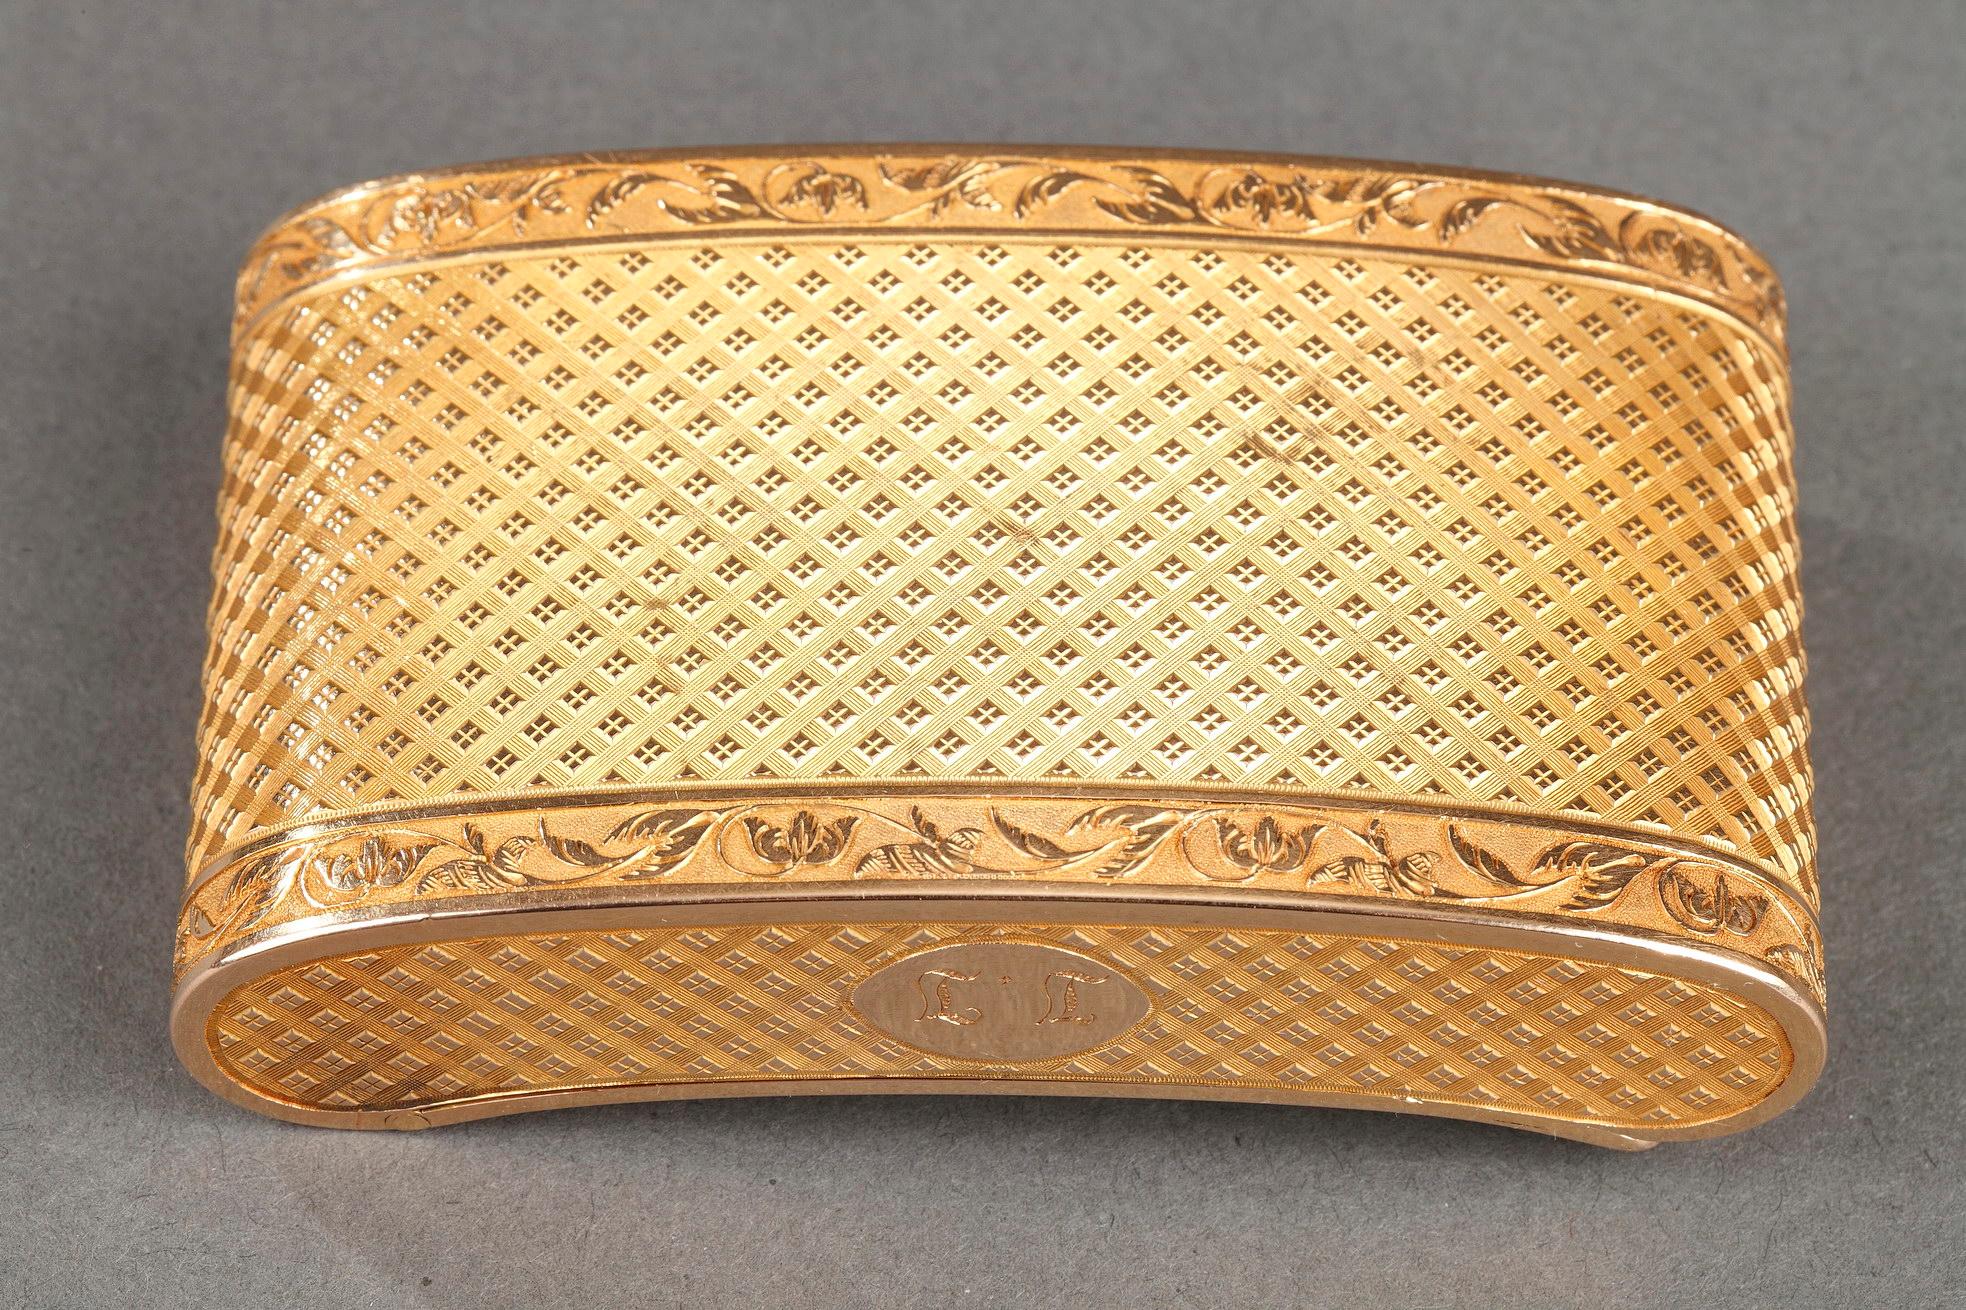 A rectangular snuff box with rounded corners. The box is lightly curved, allowing it to fit comfortably into a pocket. The box is entirely covered with intricately sculpted geometric patterns. Each panel of the box is framed in a frieze of rinceau